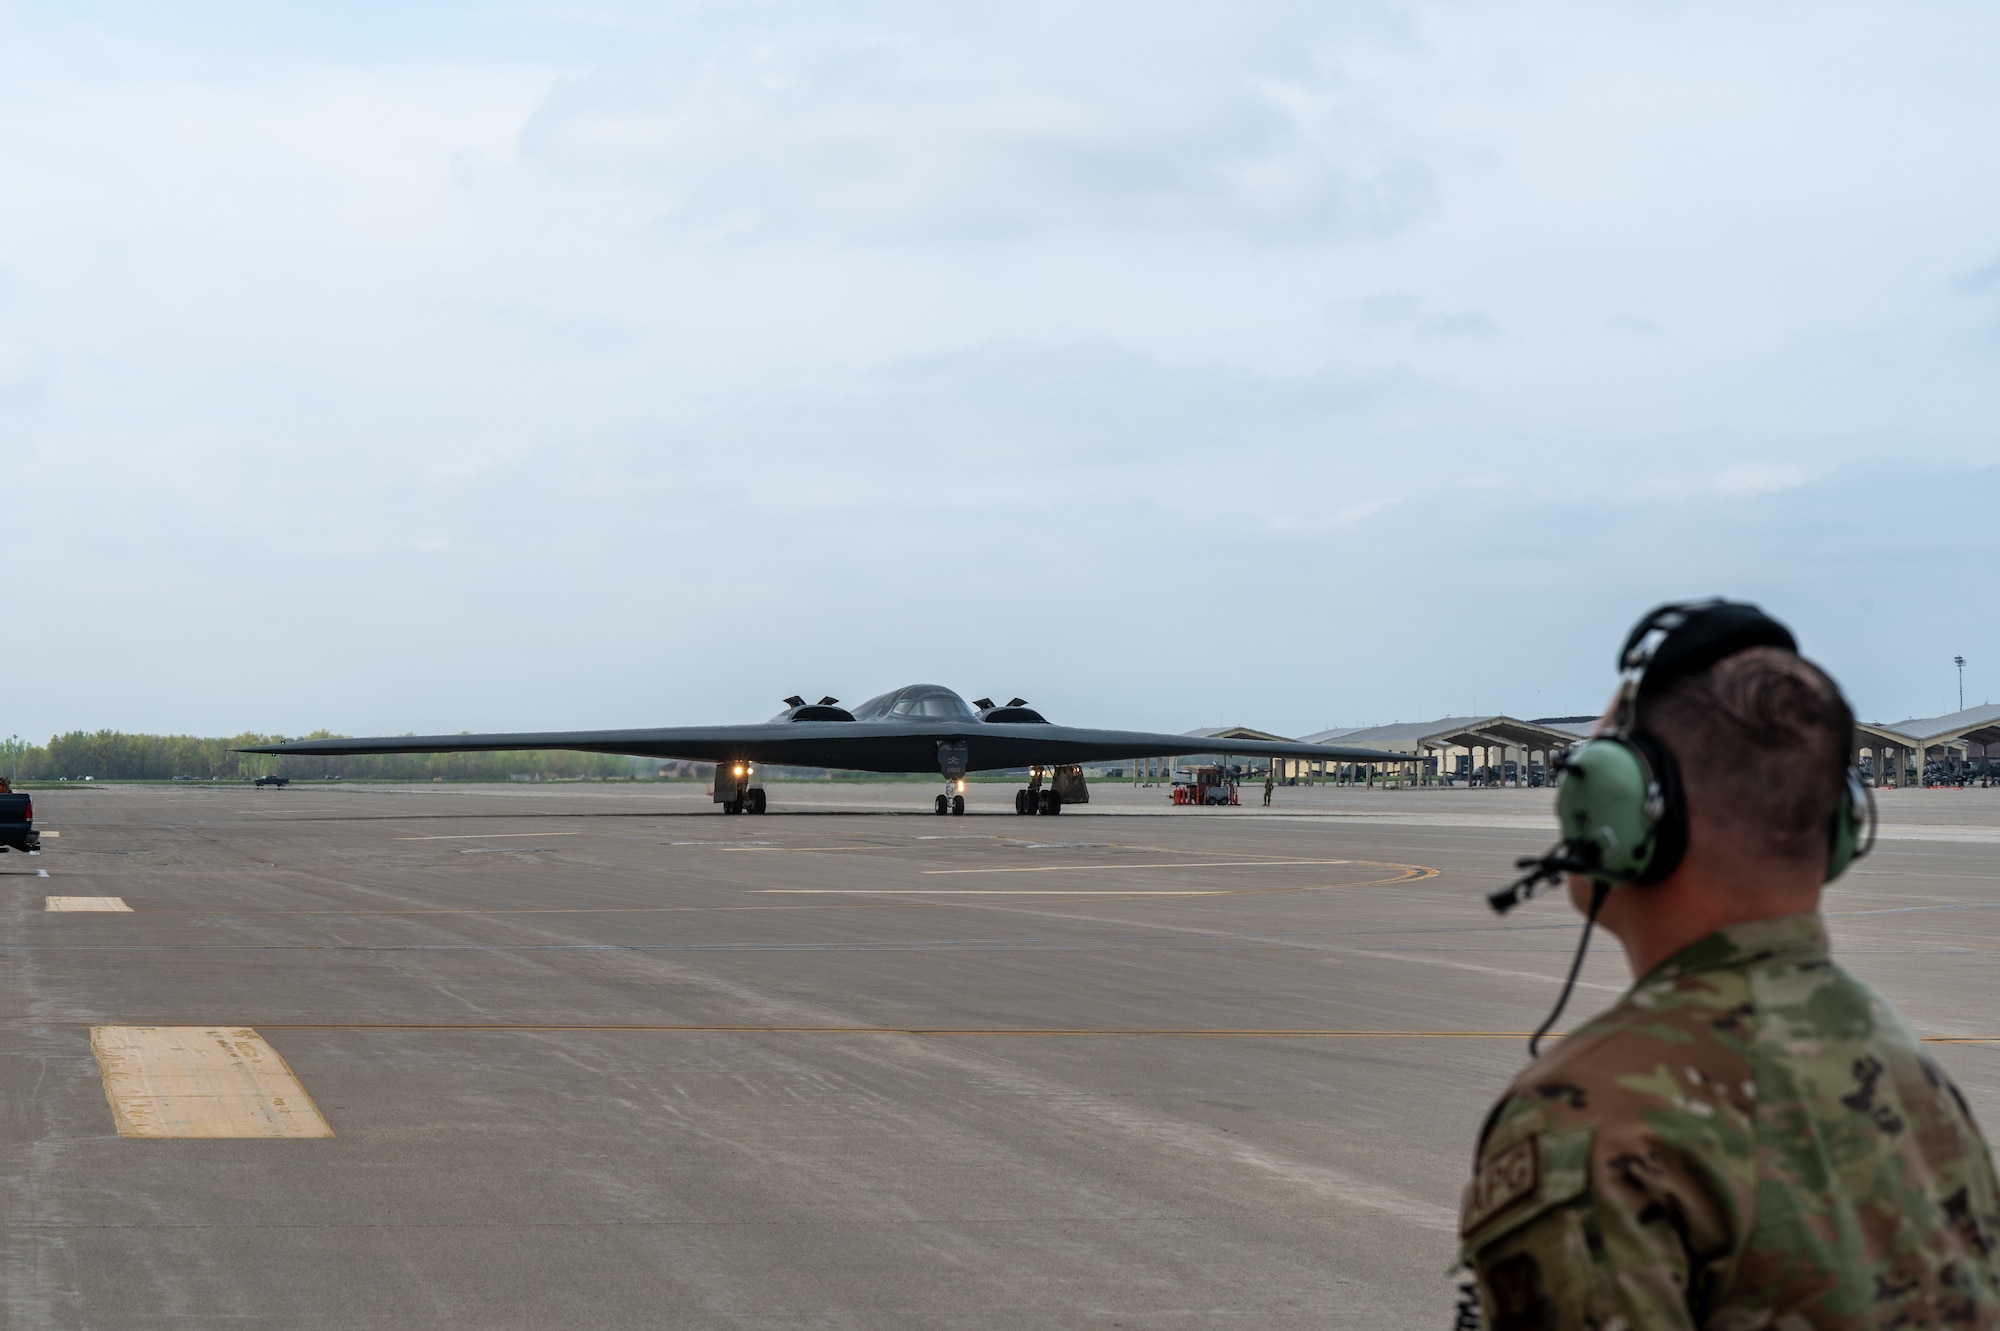 A B-2 Spirit stealth bomber assigned to Whiteman Air Force Base (AFB) taxis to the runway during Exercise Spirit Vigilance, April 15, 2024, at Whiteman AFB, Missouri. Spirit Vigilance is a base-wide exercise performed to demonstrate Whiteman's capability to provide nuclear deterrence and global strike operations anytime, anywhere. (U.S. Air National Guard photo by Airman 1st Class Grace Bynum)